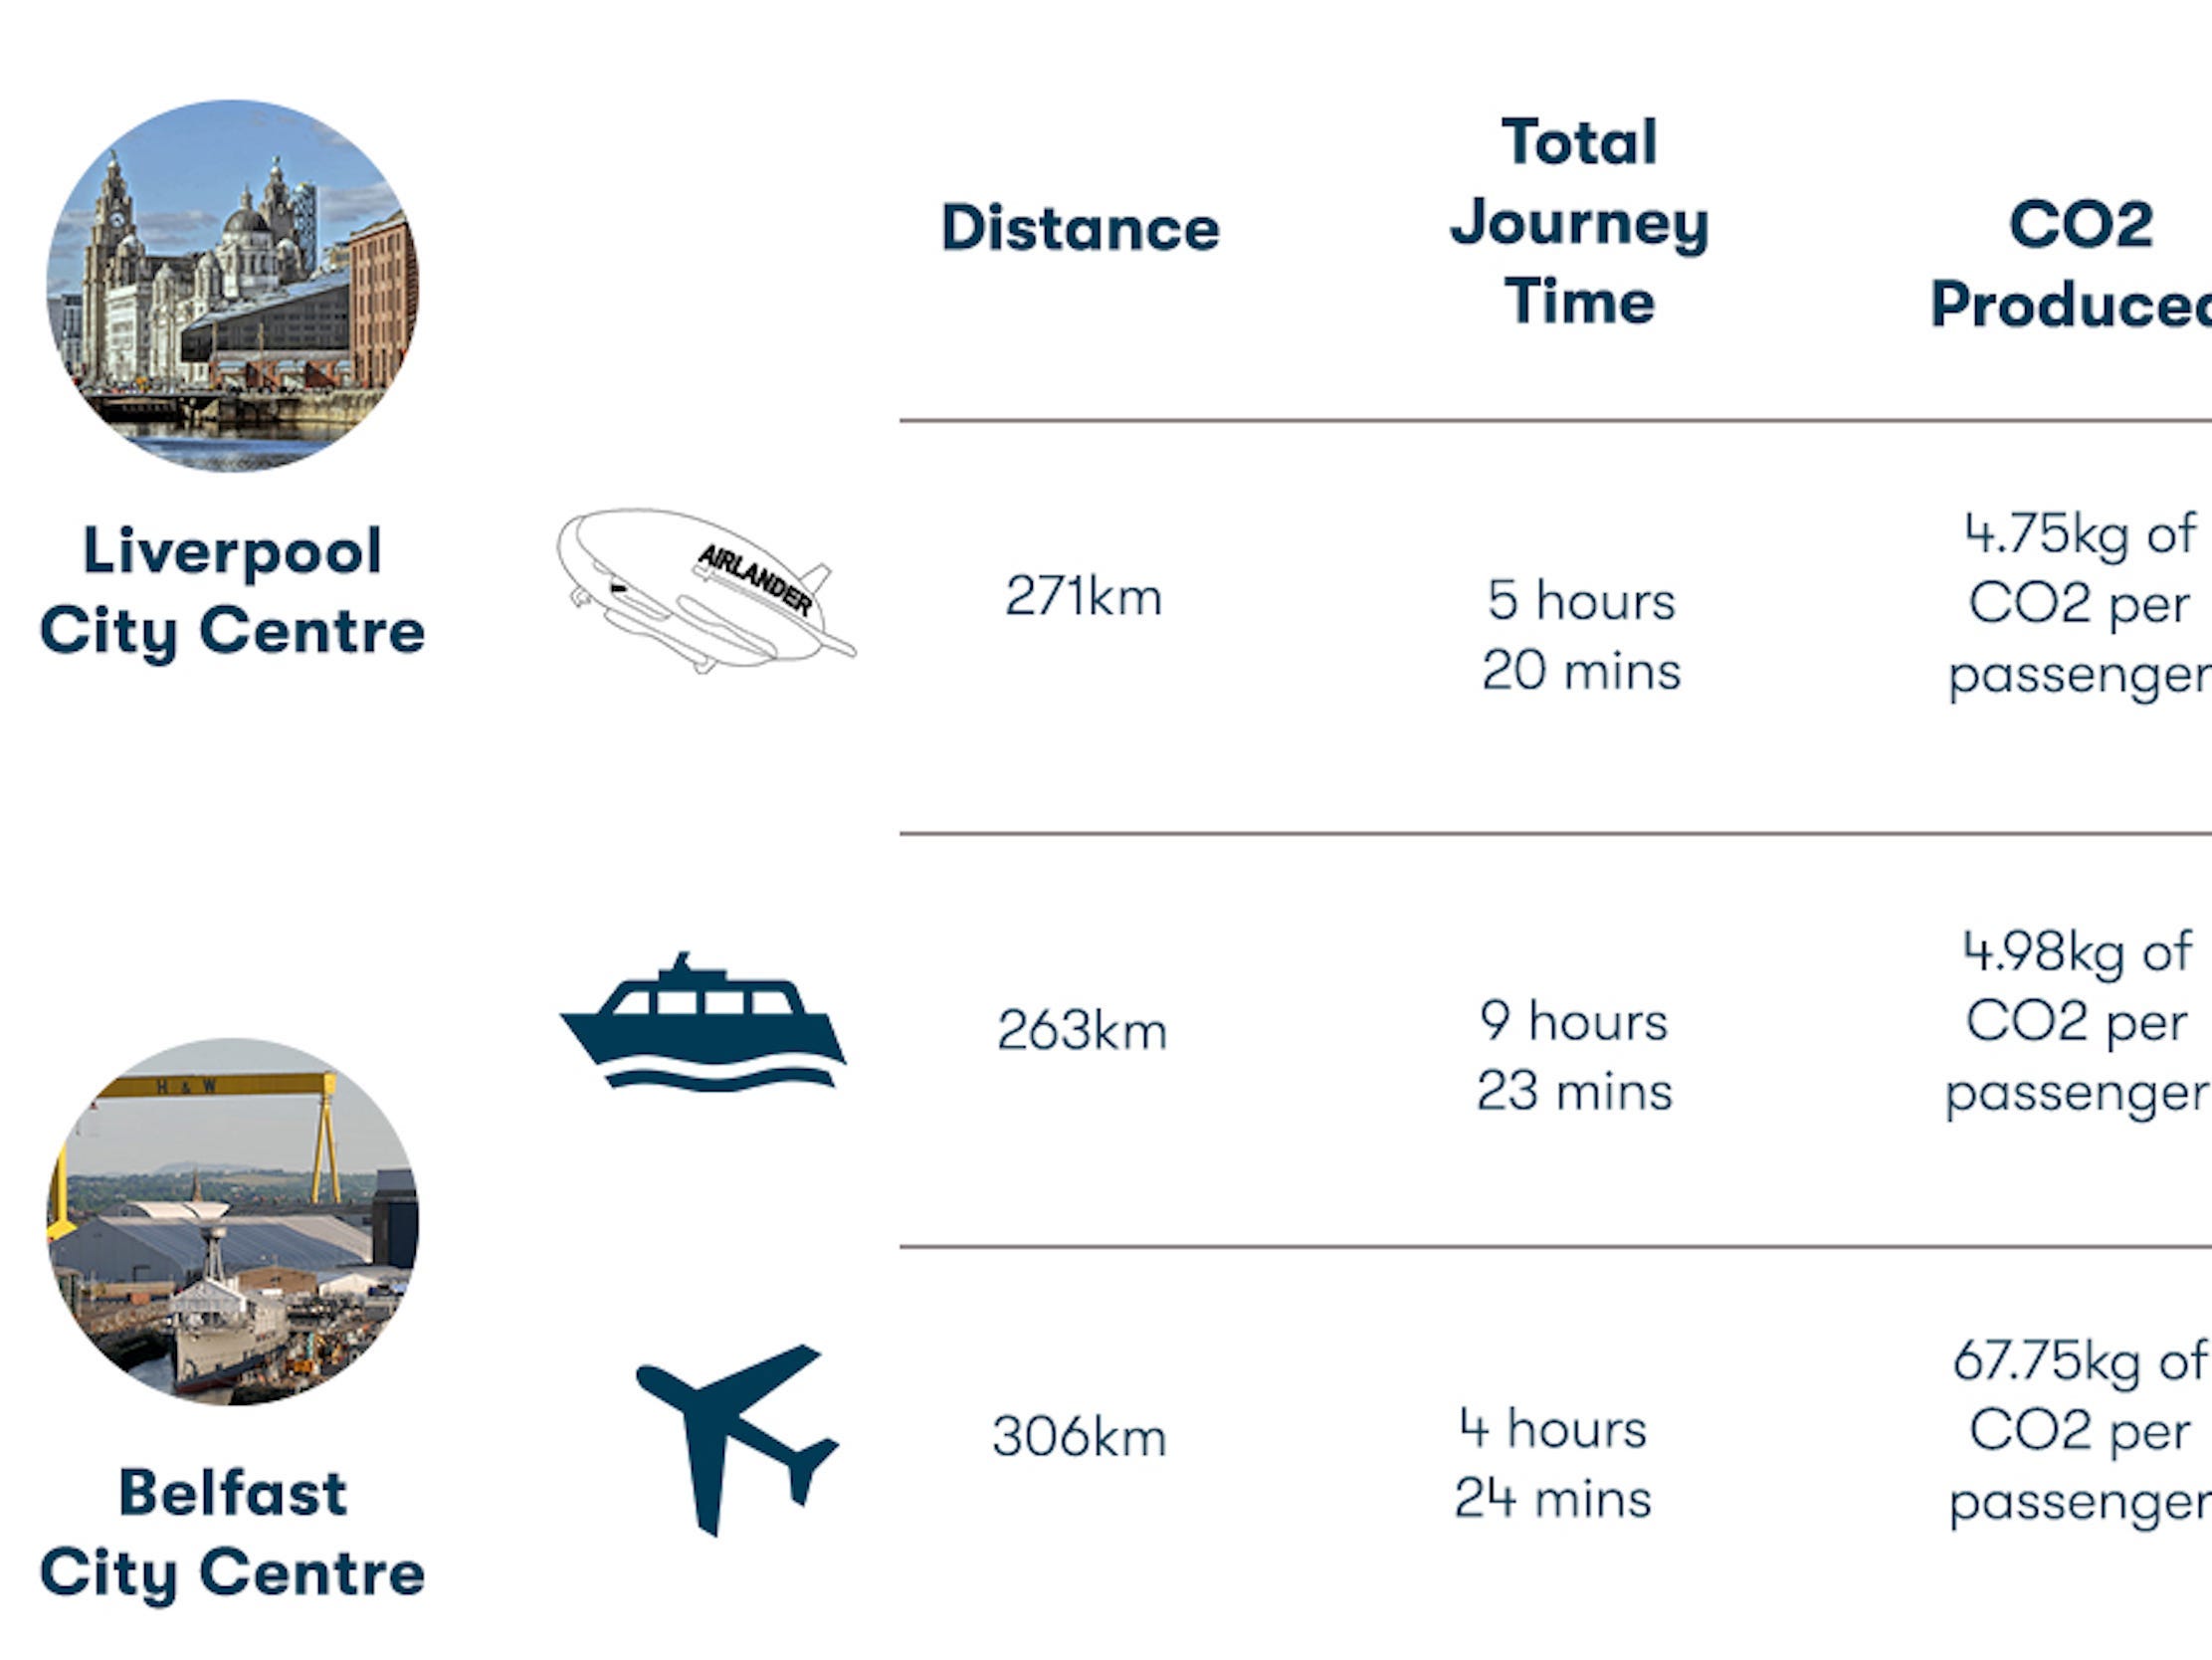 Example of a route from Liverpool to Belfast comparing the Airlander 10, driving, flight, and train times